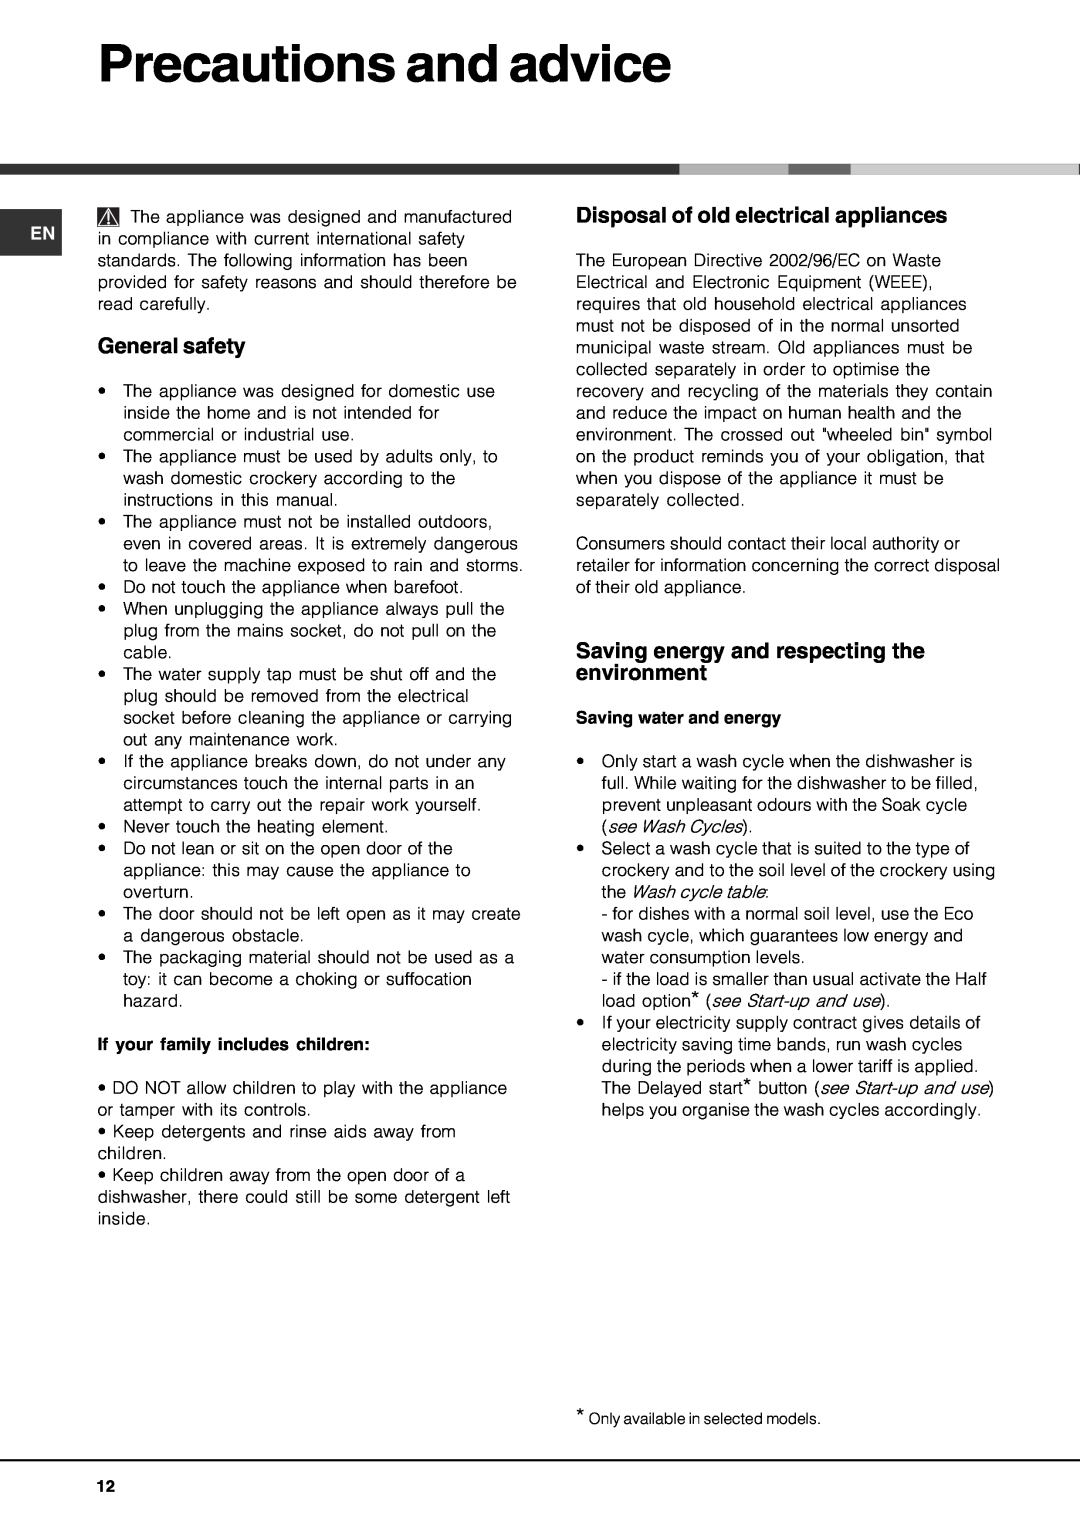 Hotpoint LFT 228 manual Precautions and advice, General safety, Disposal of old electrical appliances 